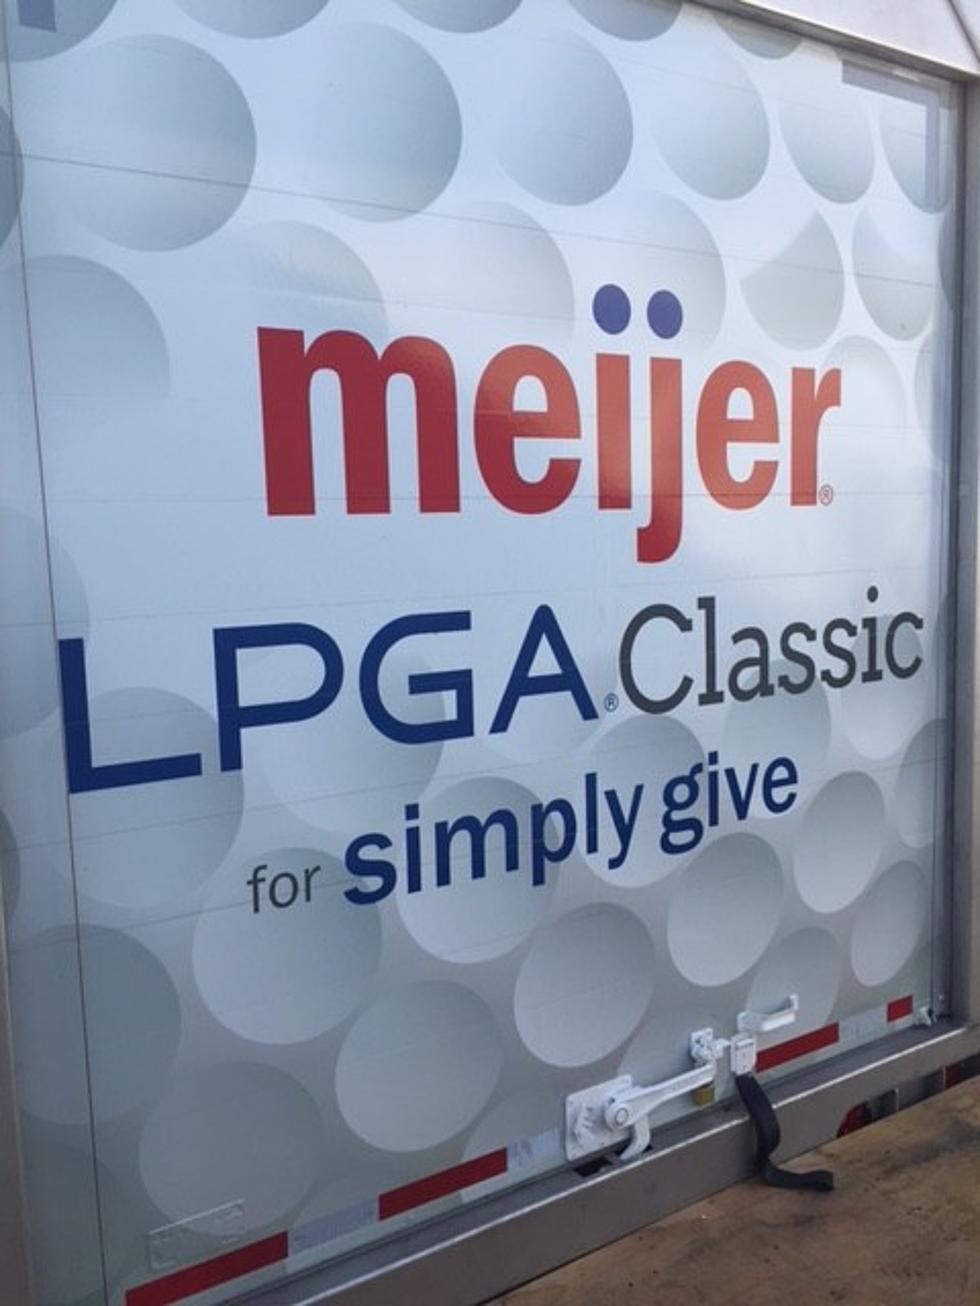 Check Out These Awesome Aerial Shots of the Meijer LPGA Classic